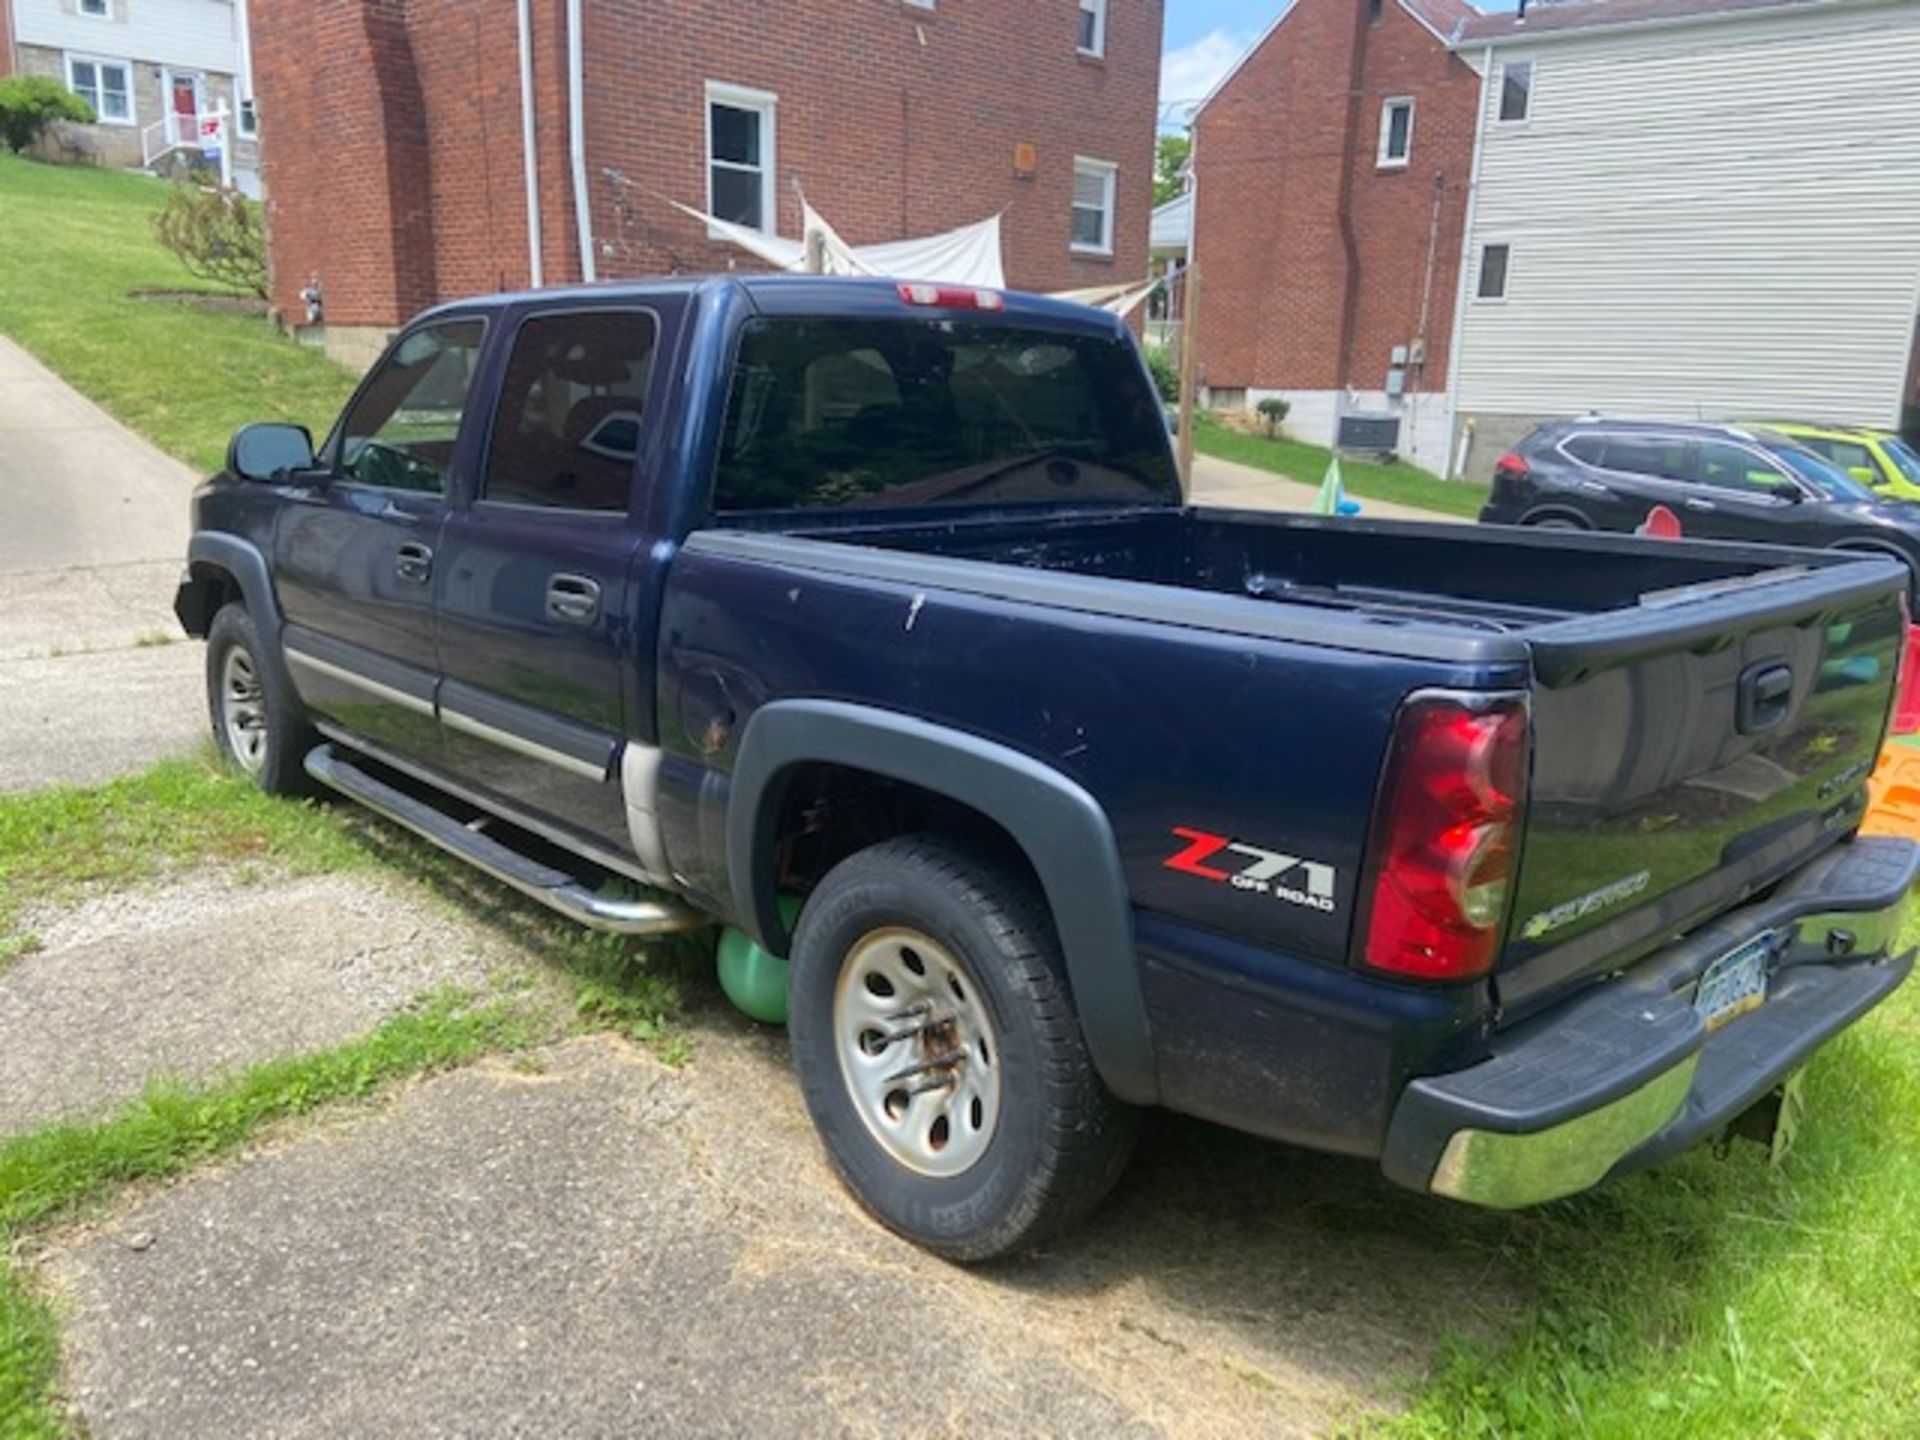 2005 Chevy Z71 Pick Up Truck, Model K15543, VIN#: 2GCEK13T951248187, with Crew Cab (NOTE: IT IS - Image 2 of 14